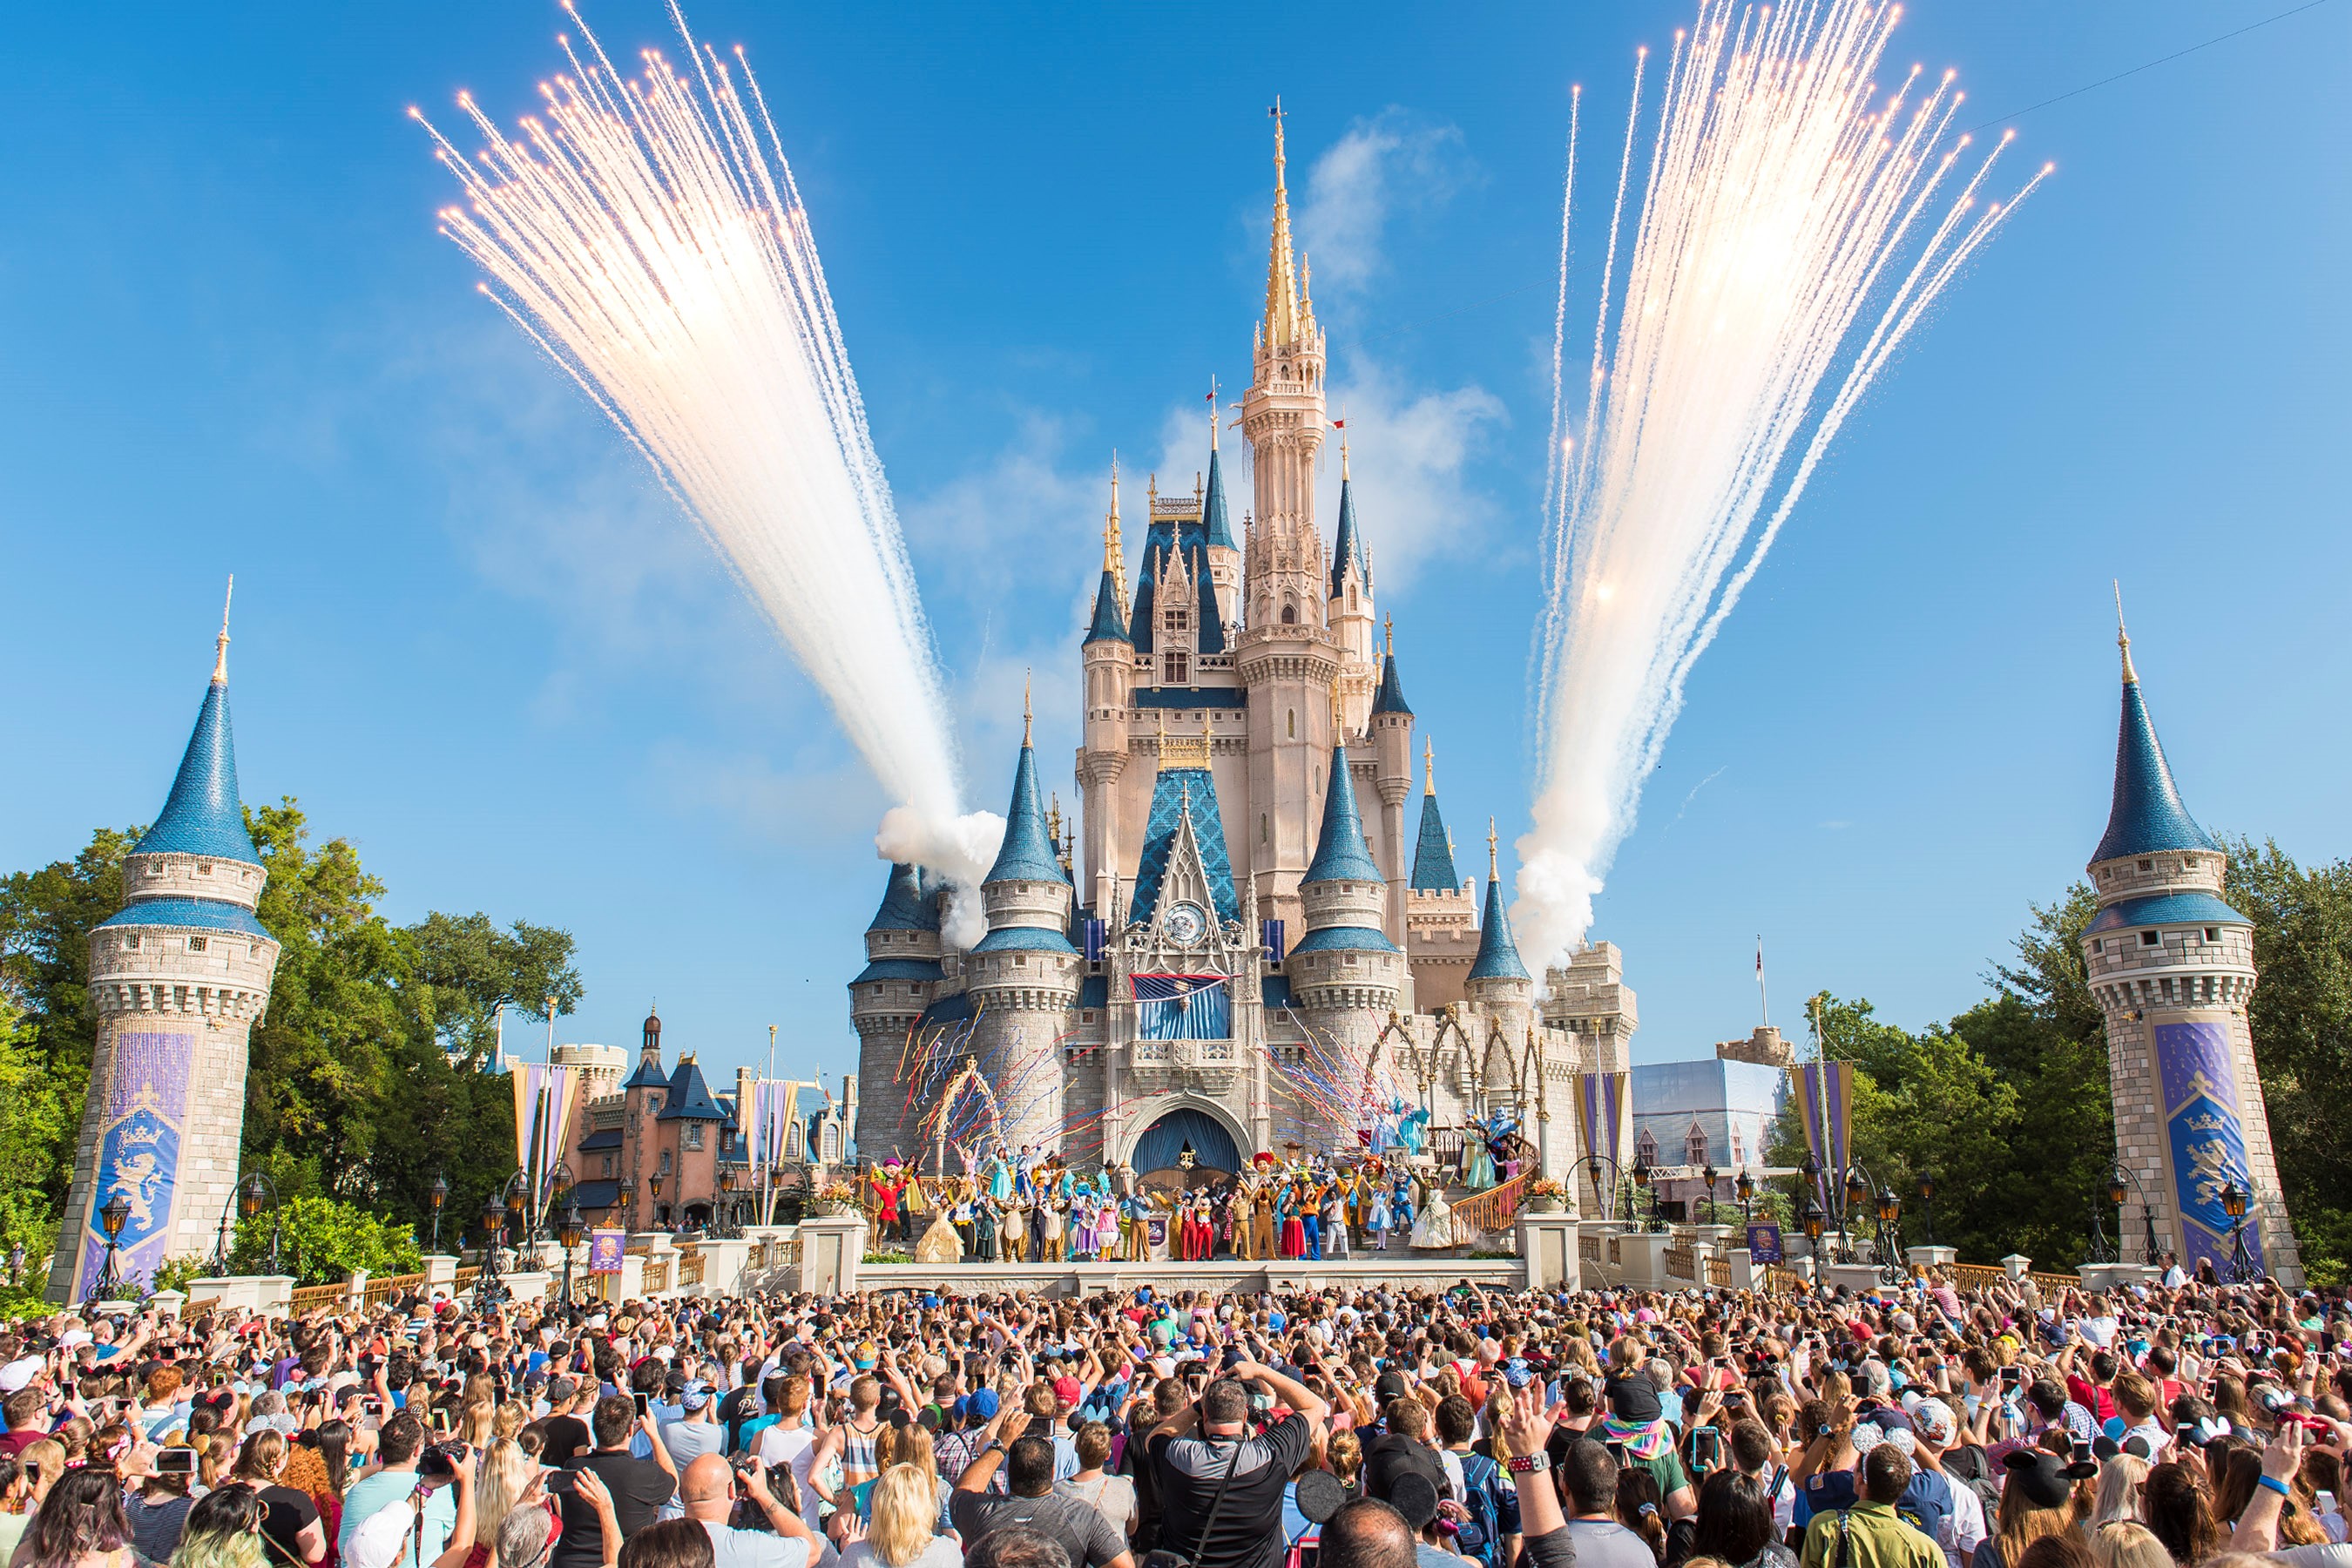 Disney World's Magic Kingdom in Florida, where park goers can listen to their favorite ride queue music